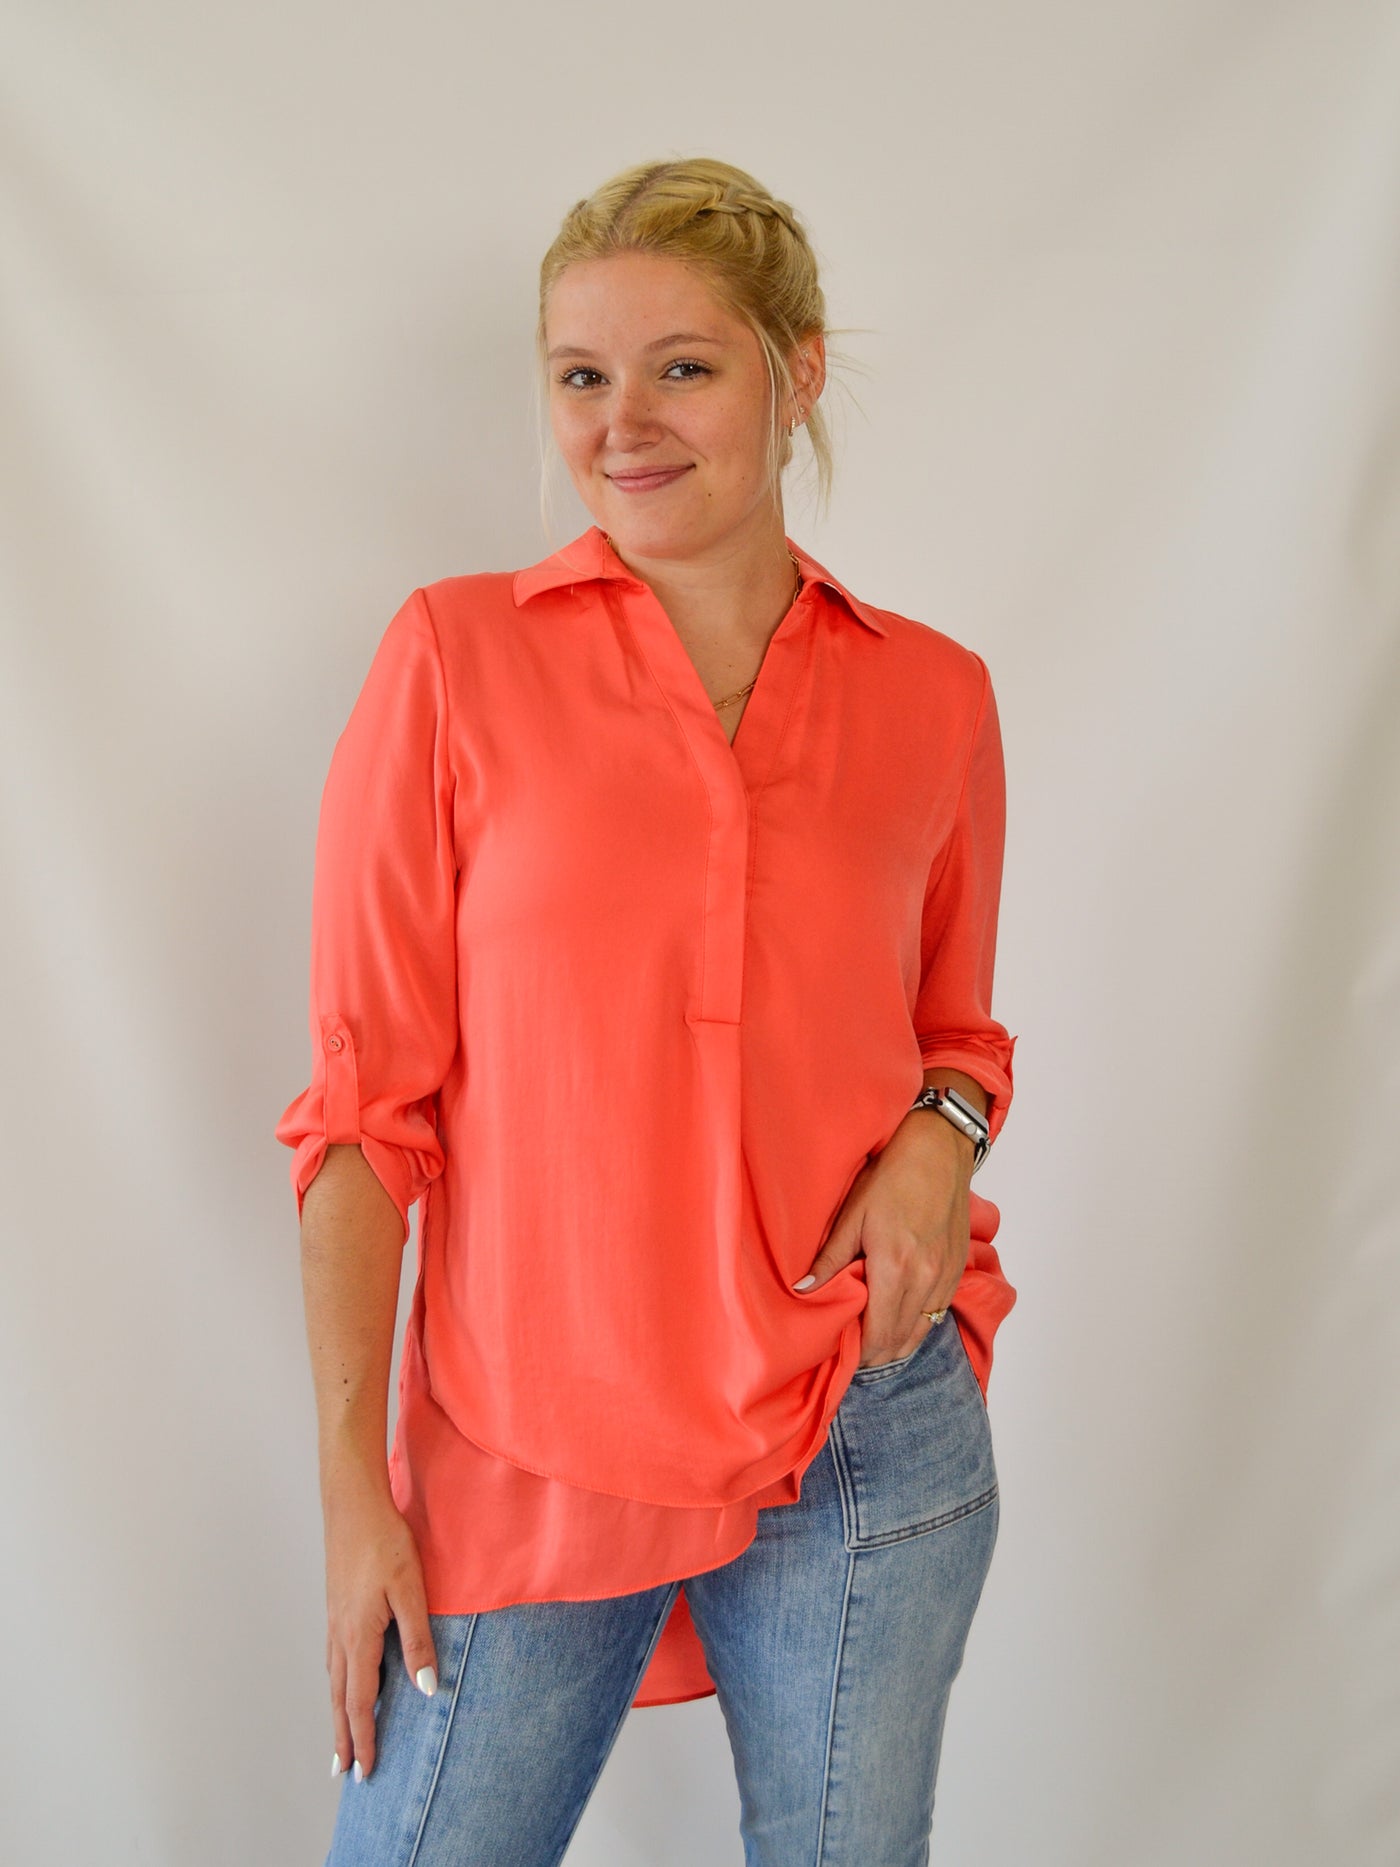 A model wearing a coral peach colored airflow blouse. The blouse is longer in the back than the front. She has it paired with denim jeans.